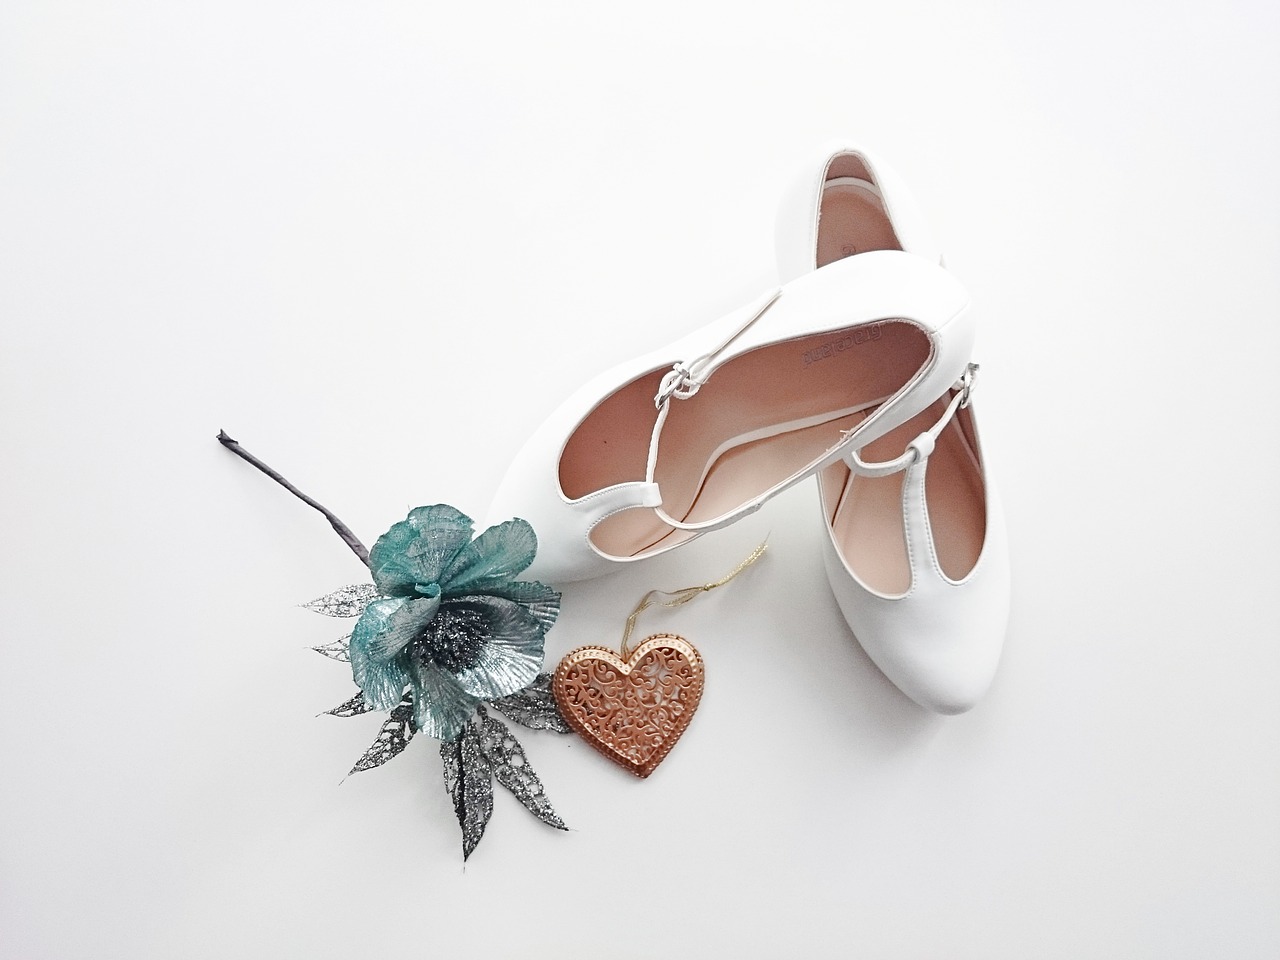 A pair of bridal shoes and a flower.